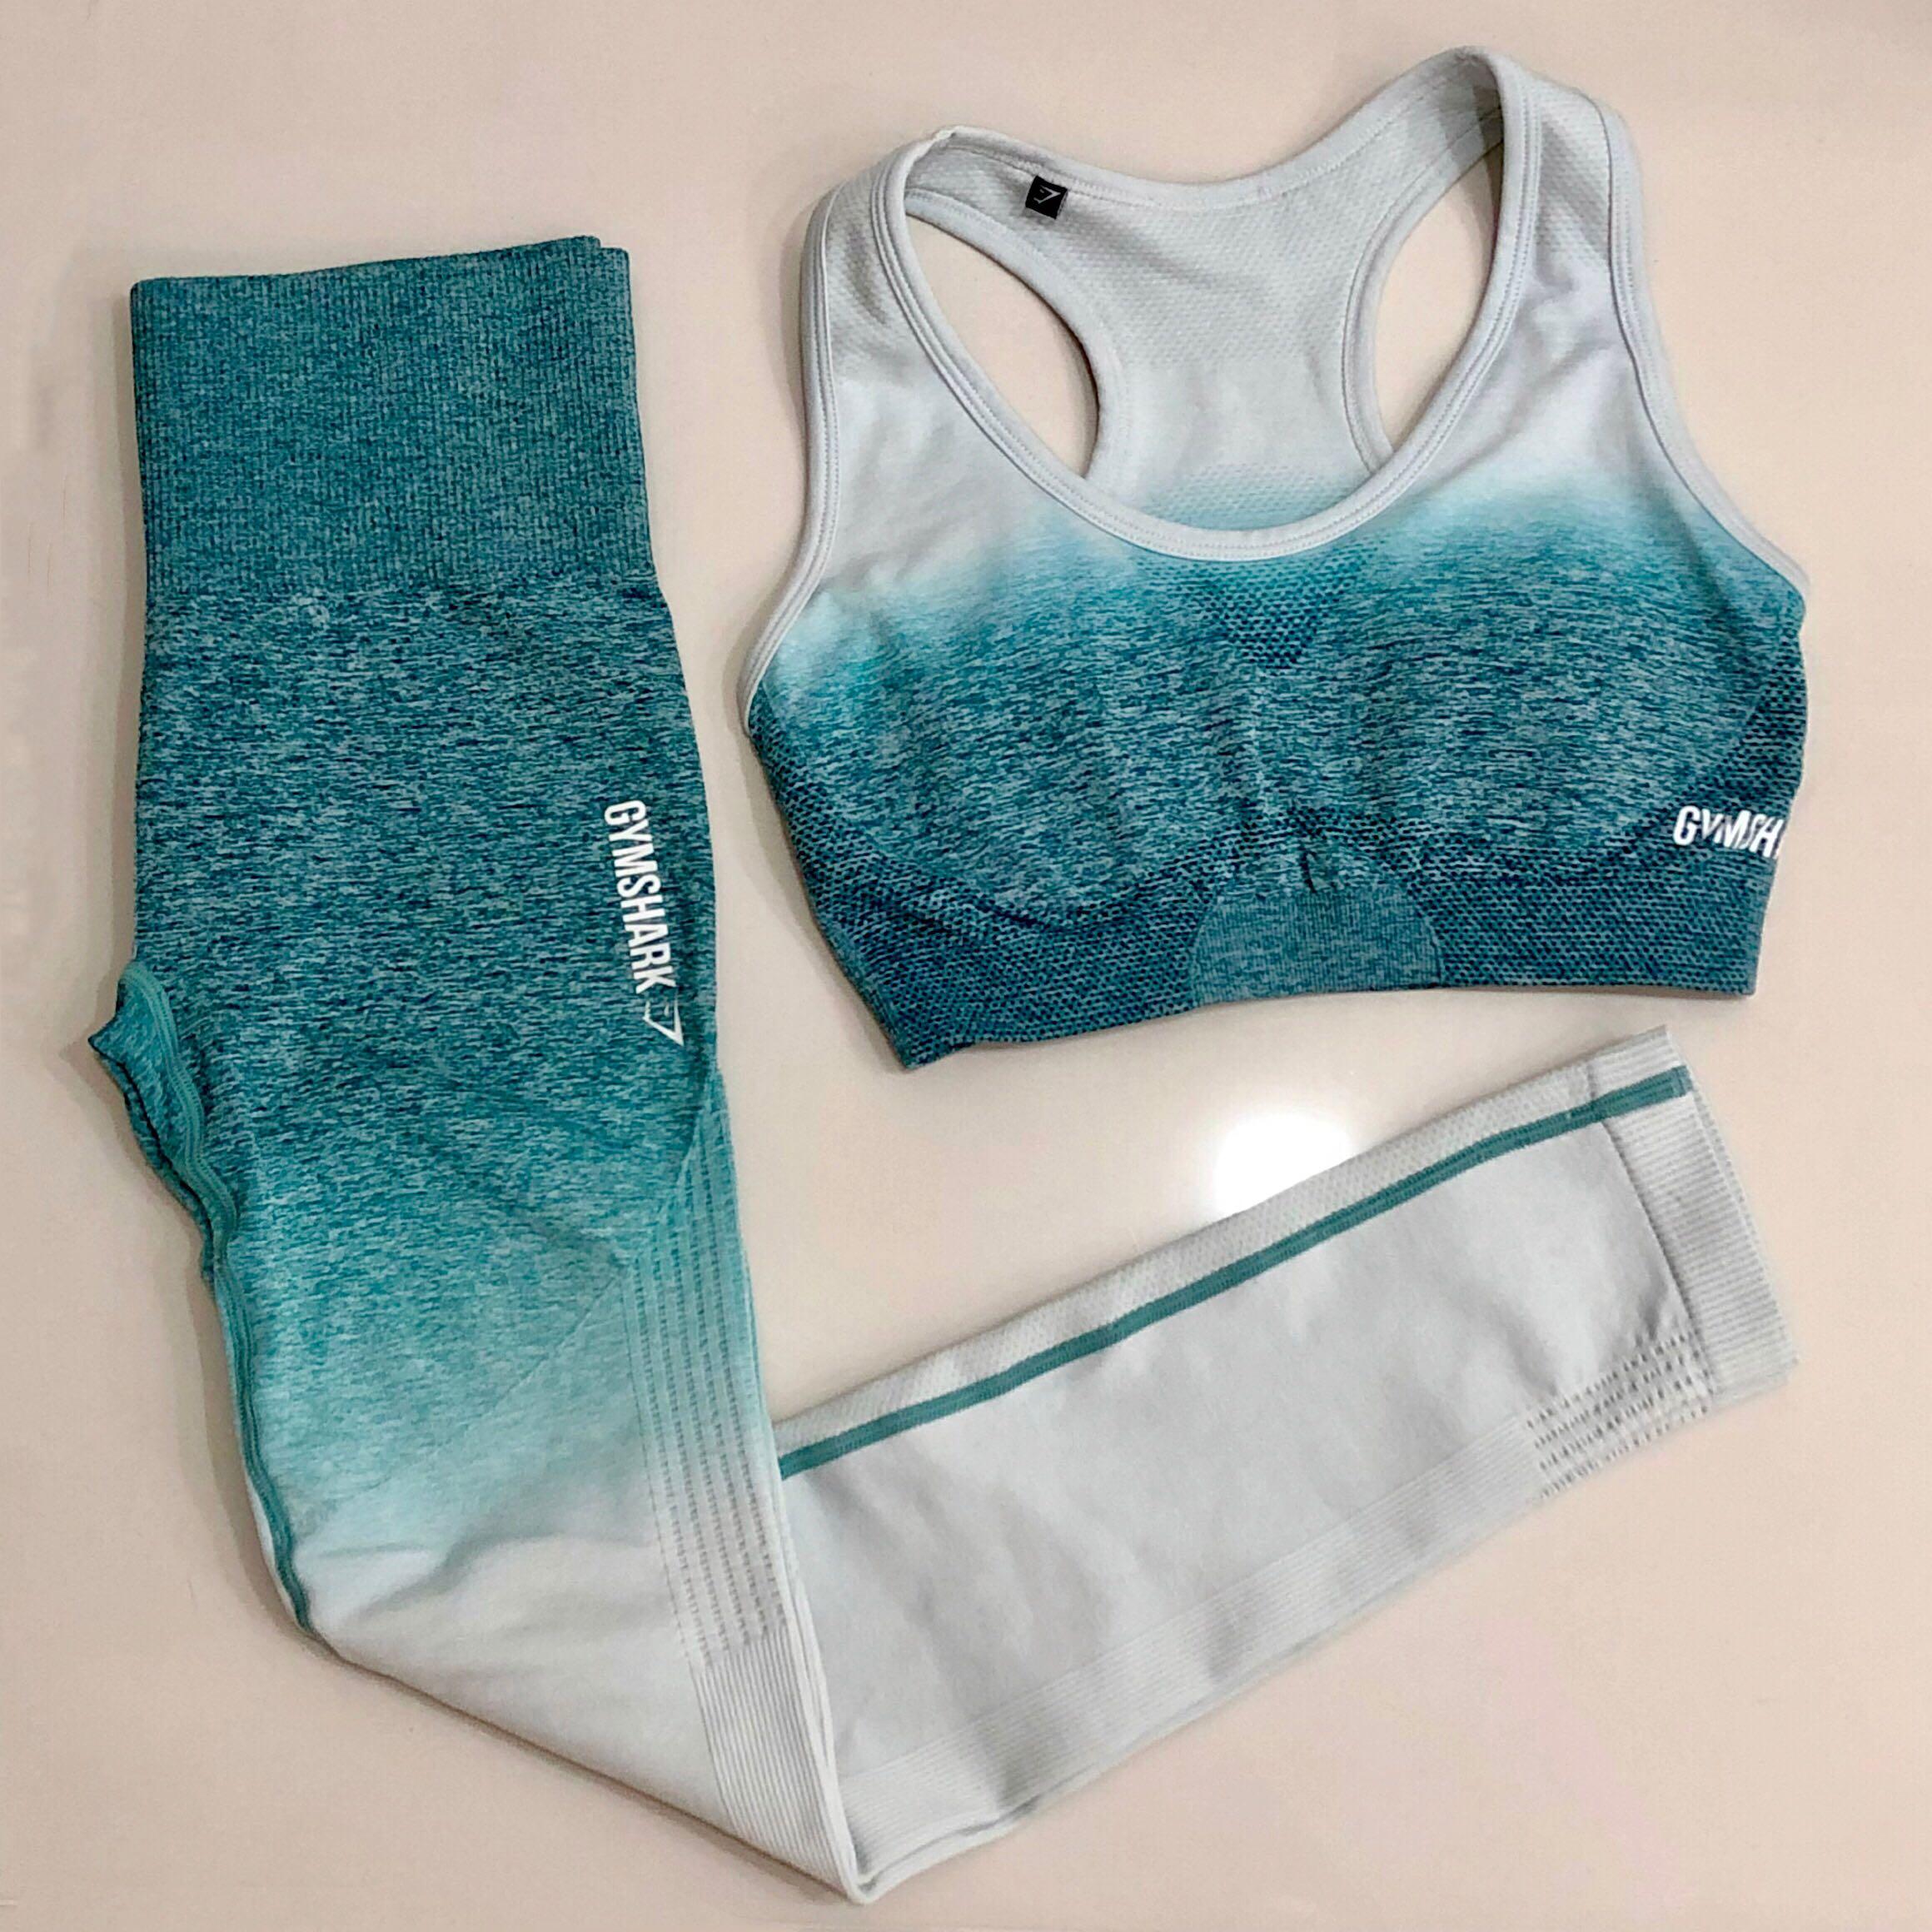 Set> Gymshark Ombre Seamless Sports Bra Leggings Vest - Deep Teal / Ice Blue  XS Extra Small #athleisureparty, Women's Fashion, Activewear on Carousell